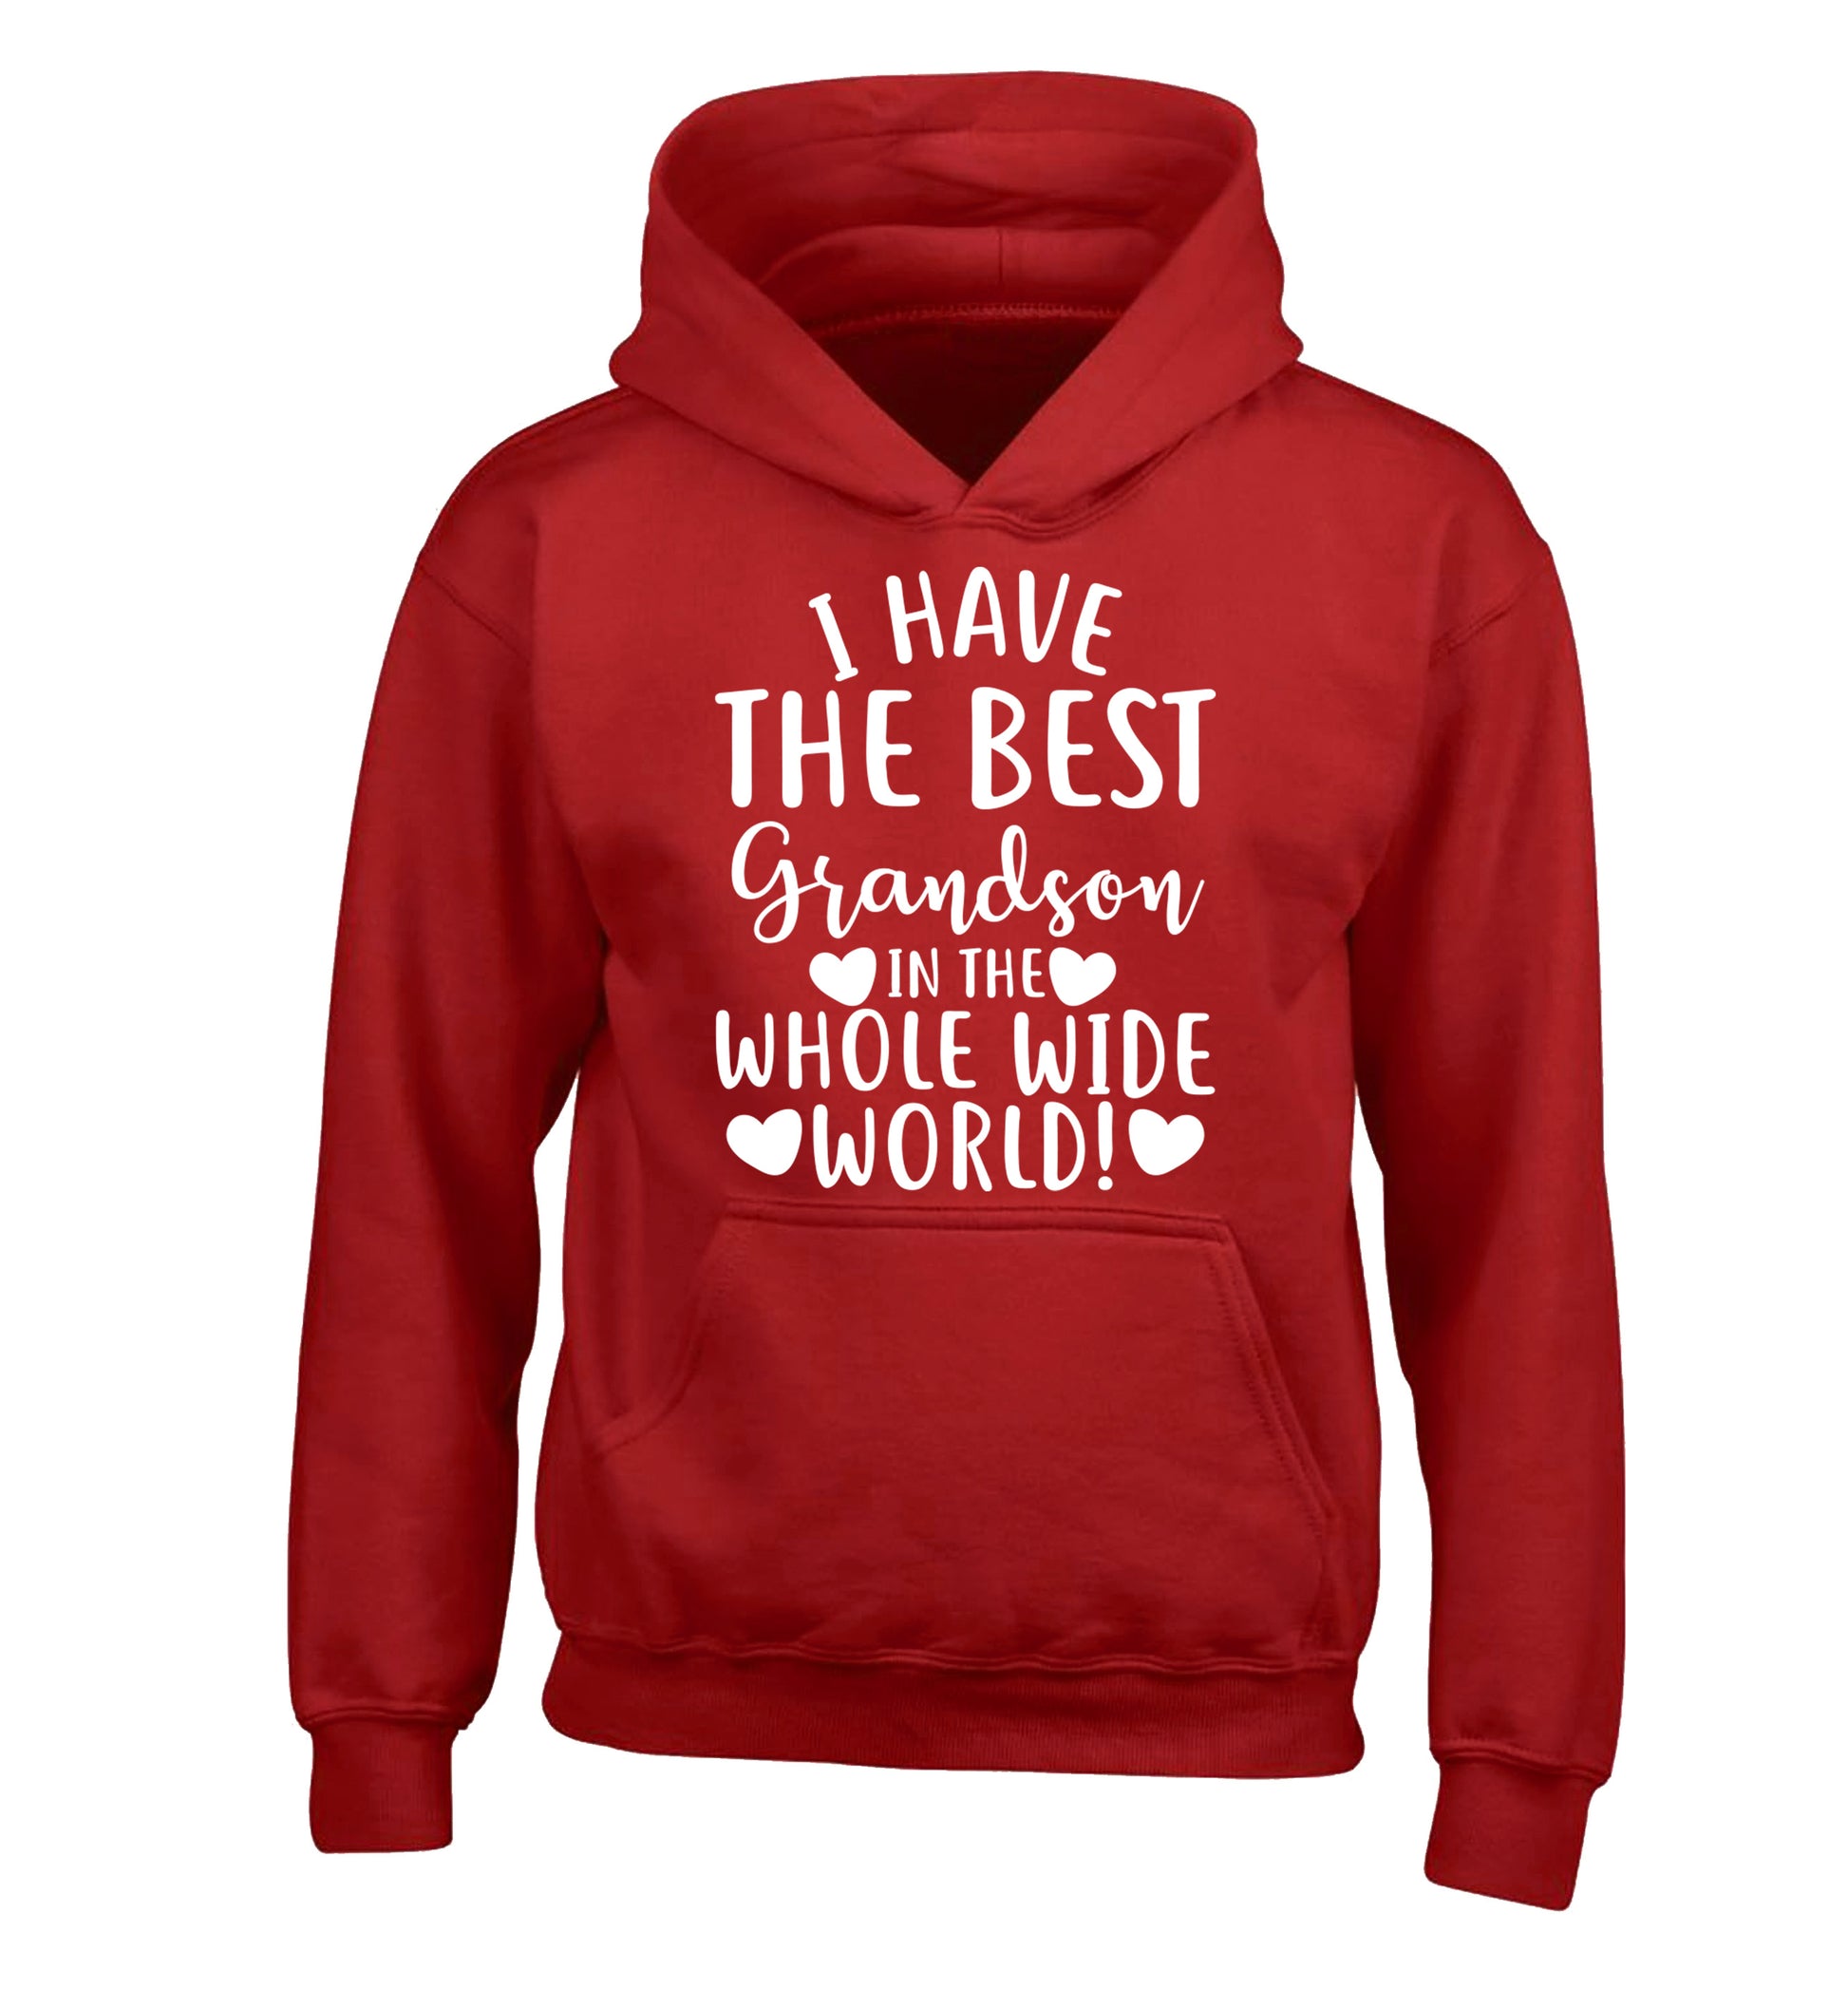 I have the best grandson in the whole wide world! children's red hoodie 12-13 Years